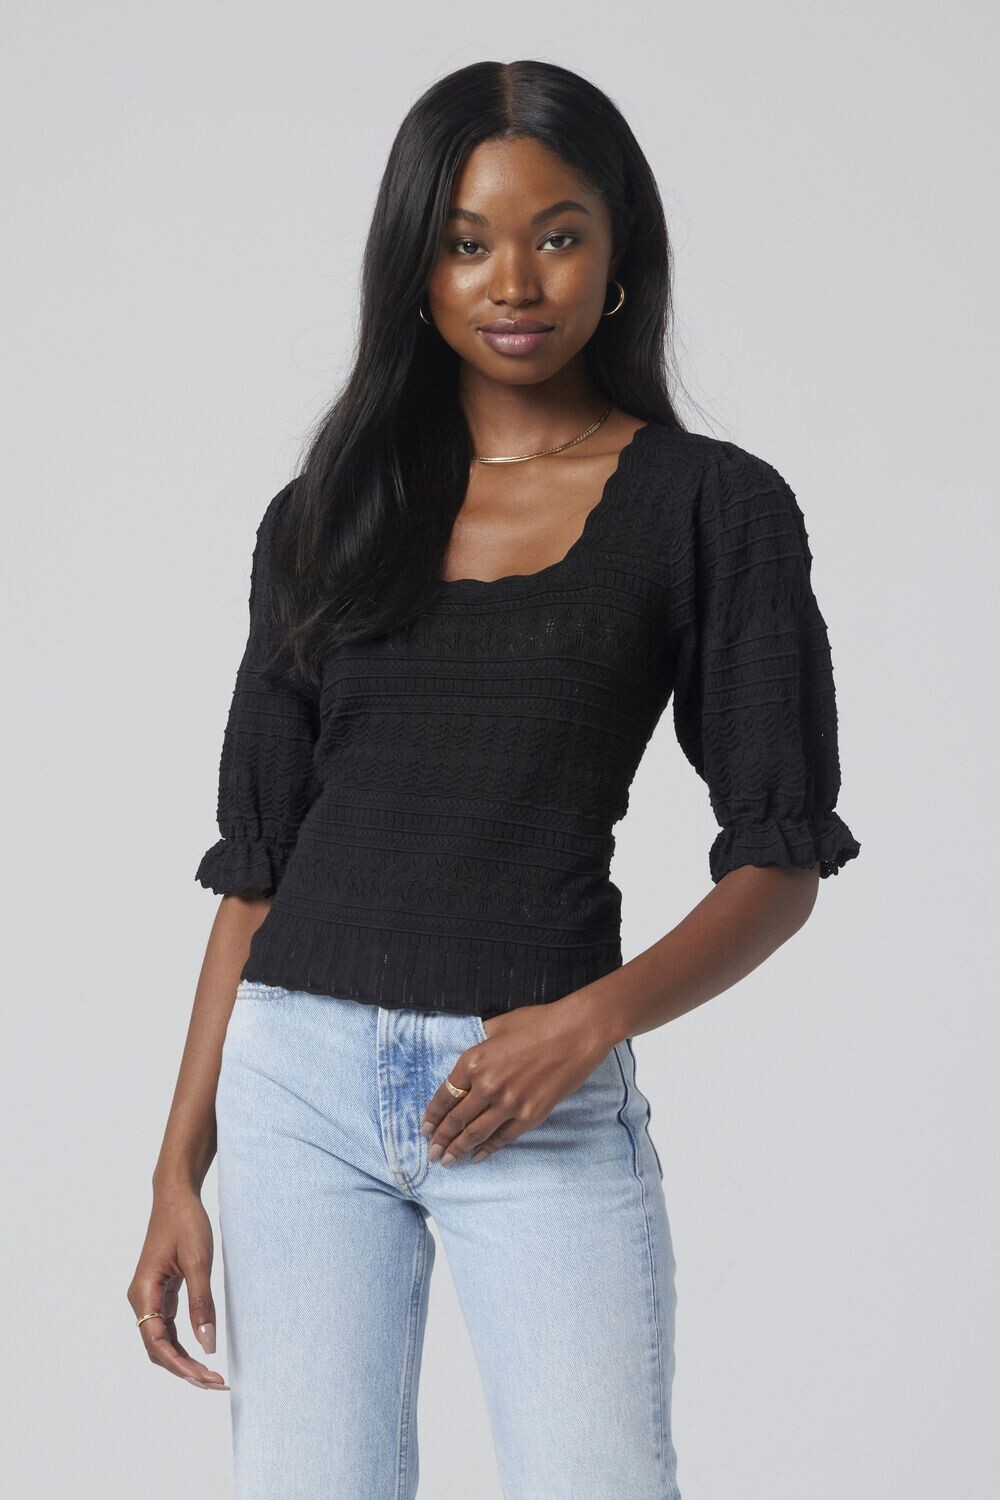 Saltwater Luxe- Zion Sweater